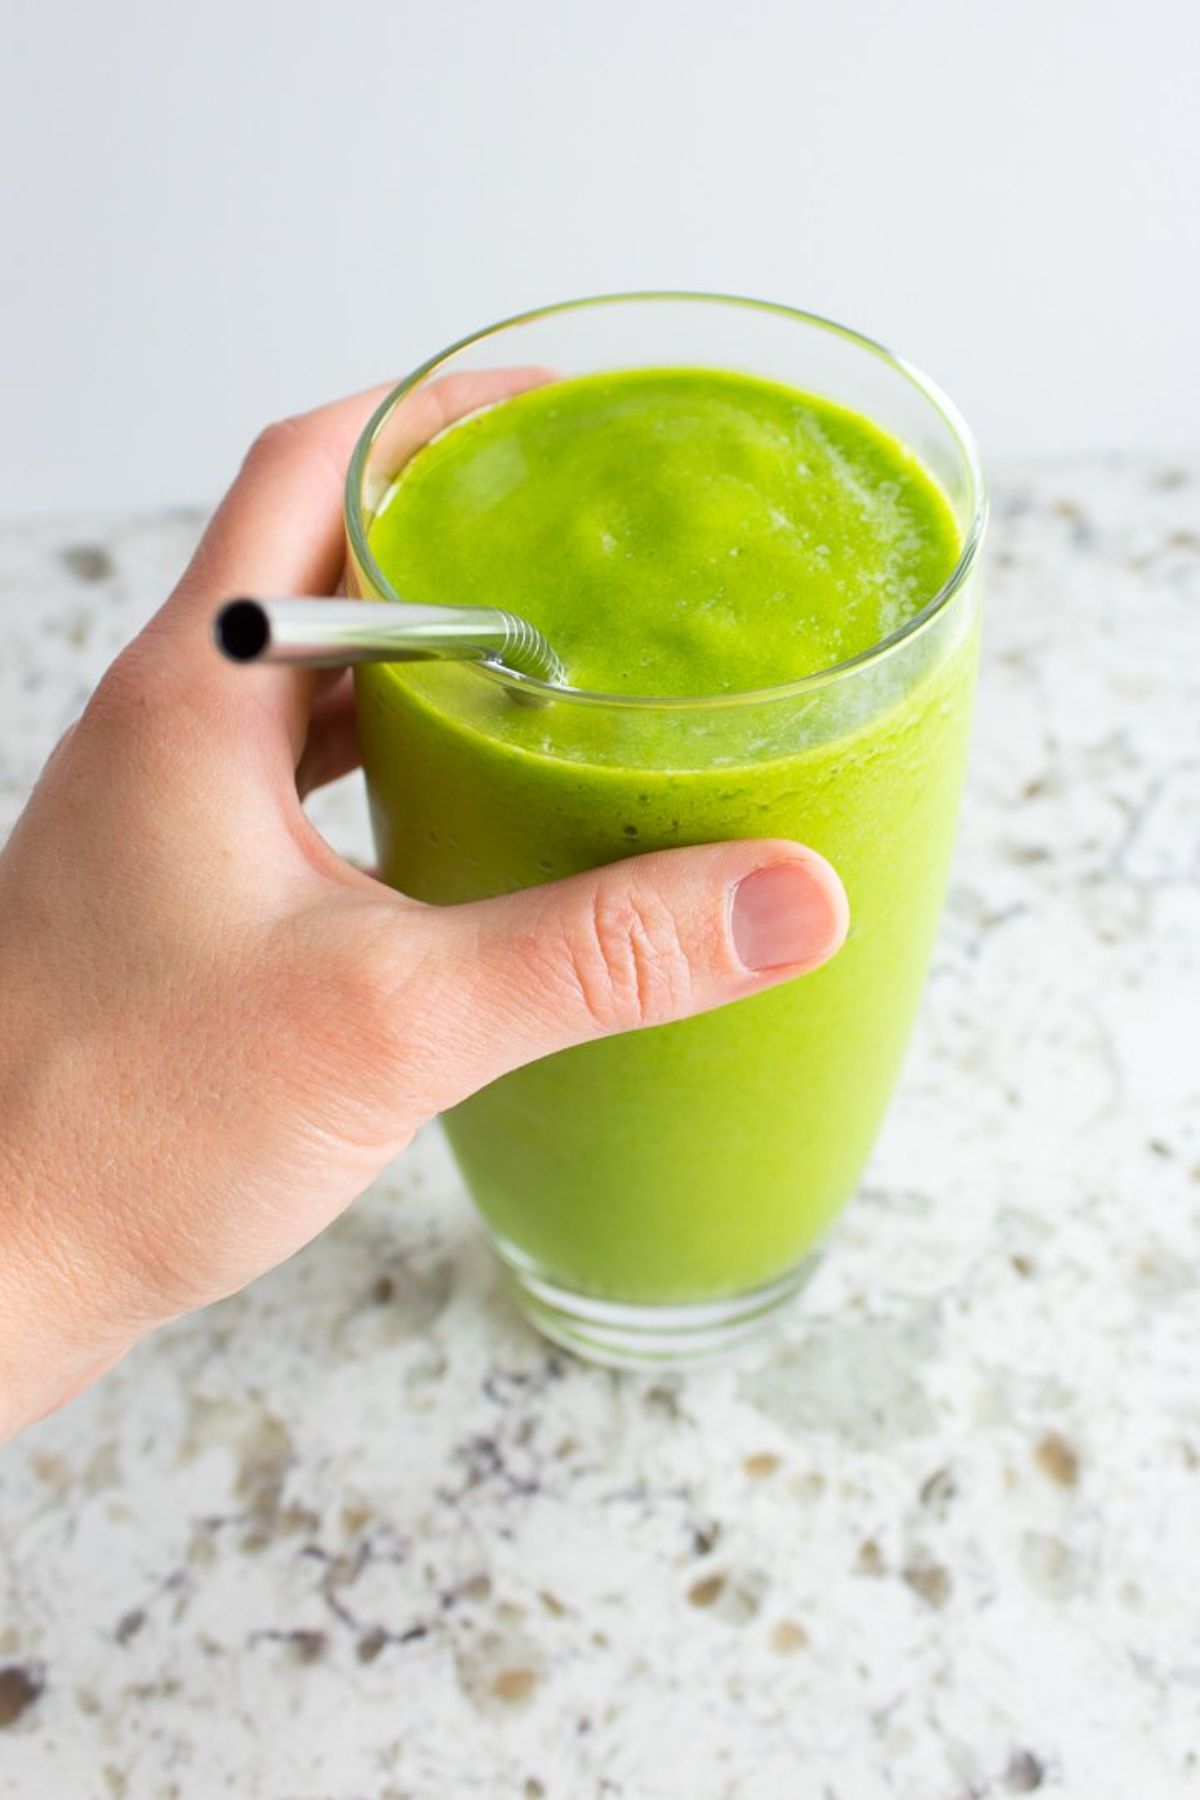 A hand holds a glass of green smoothie with a metal straw sticking out of it